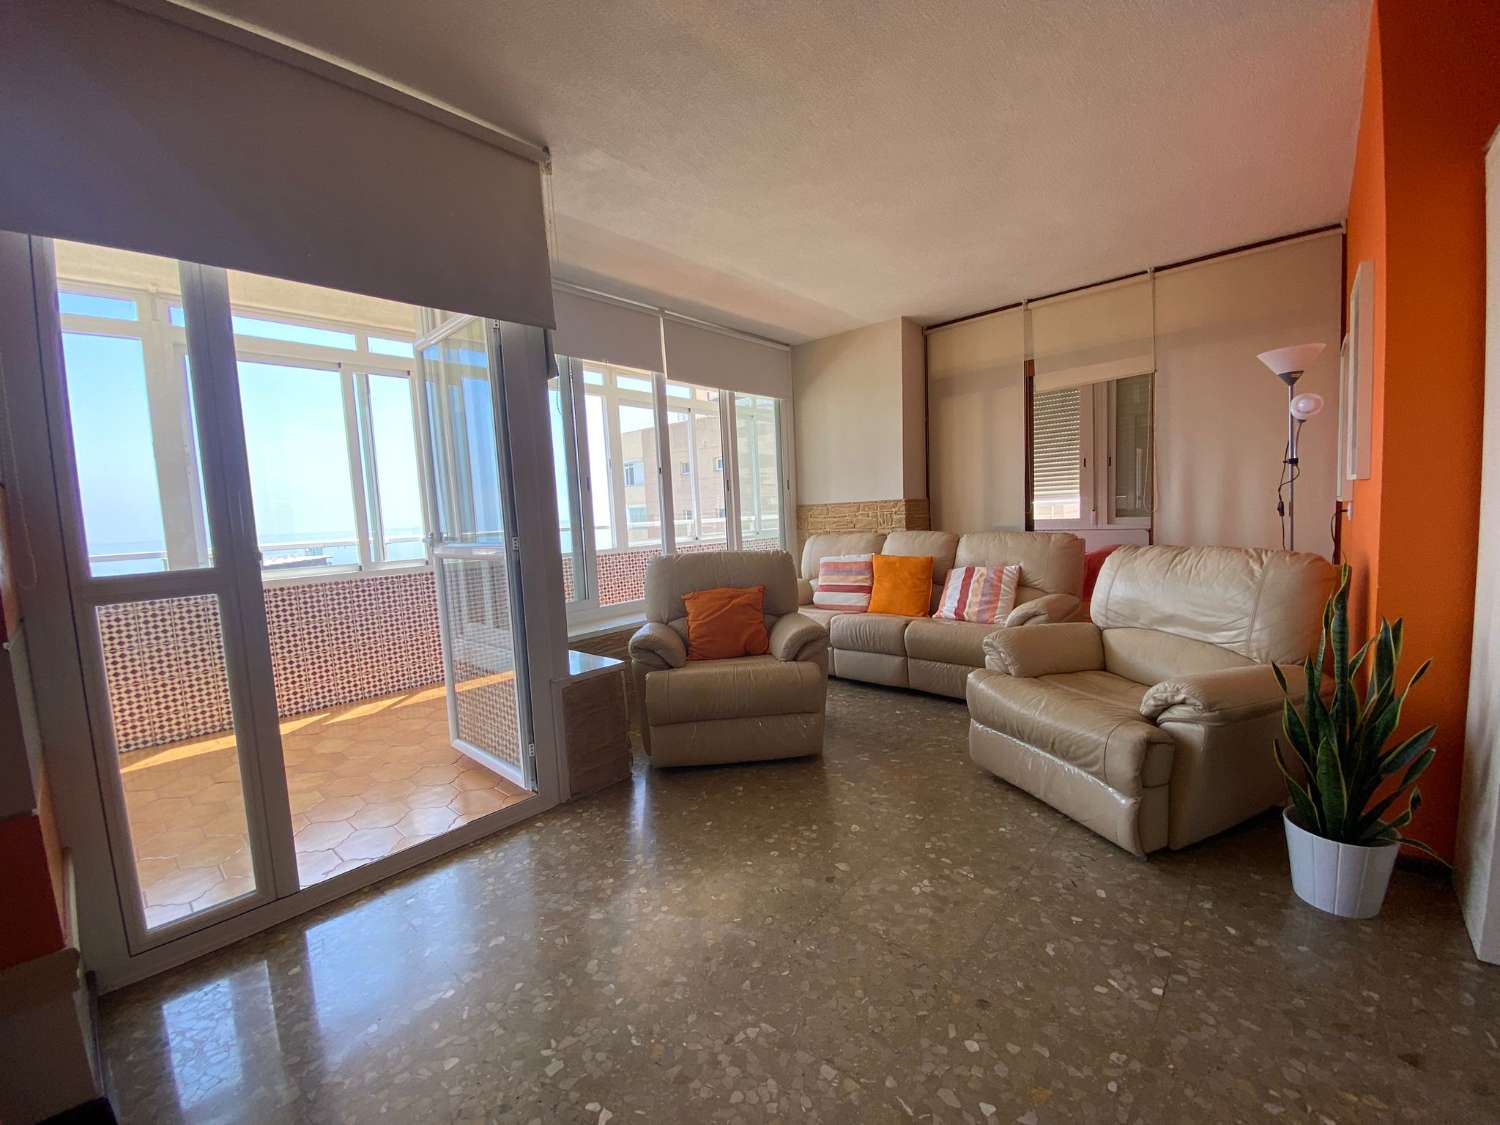 For rent from 01/09/23 to 30/06/24 magnificent apartment in Playamar with sea views (Torremolinos)